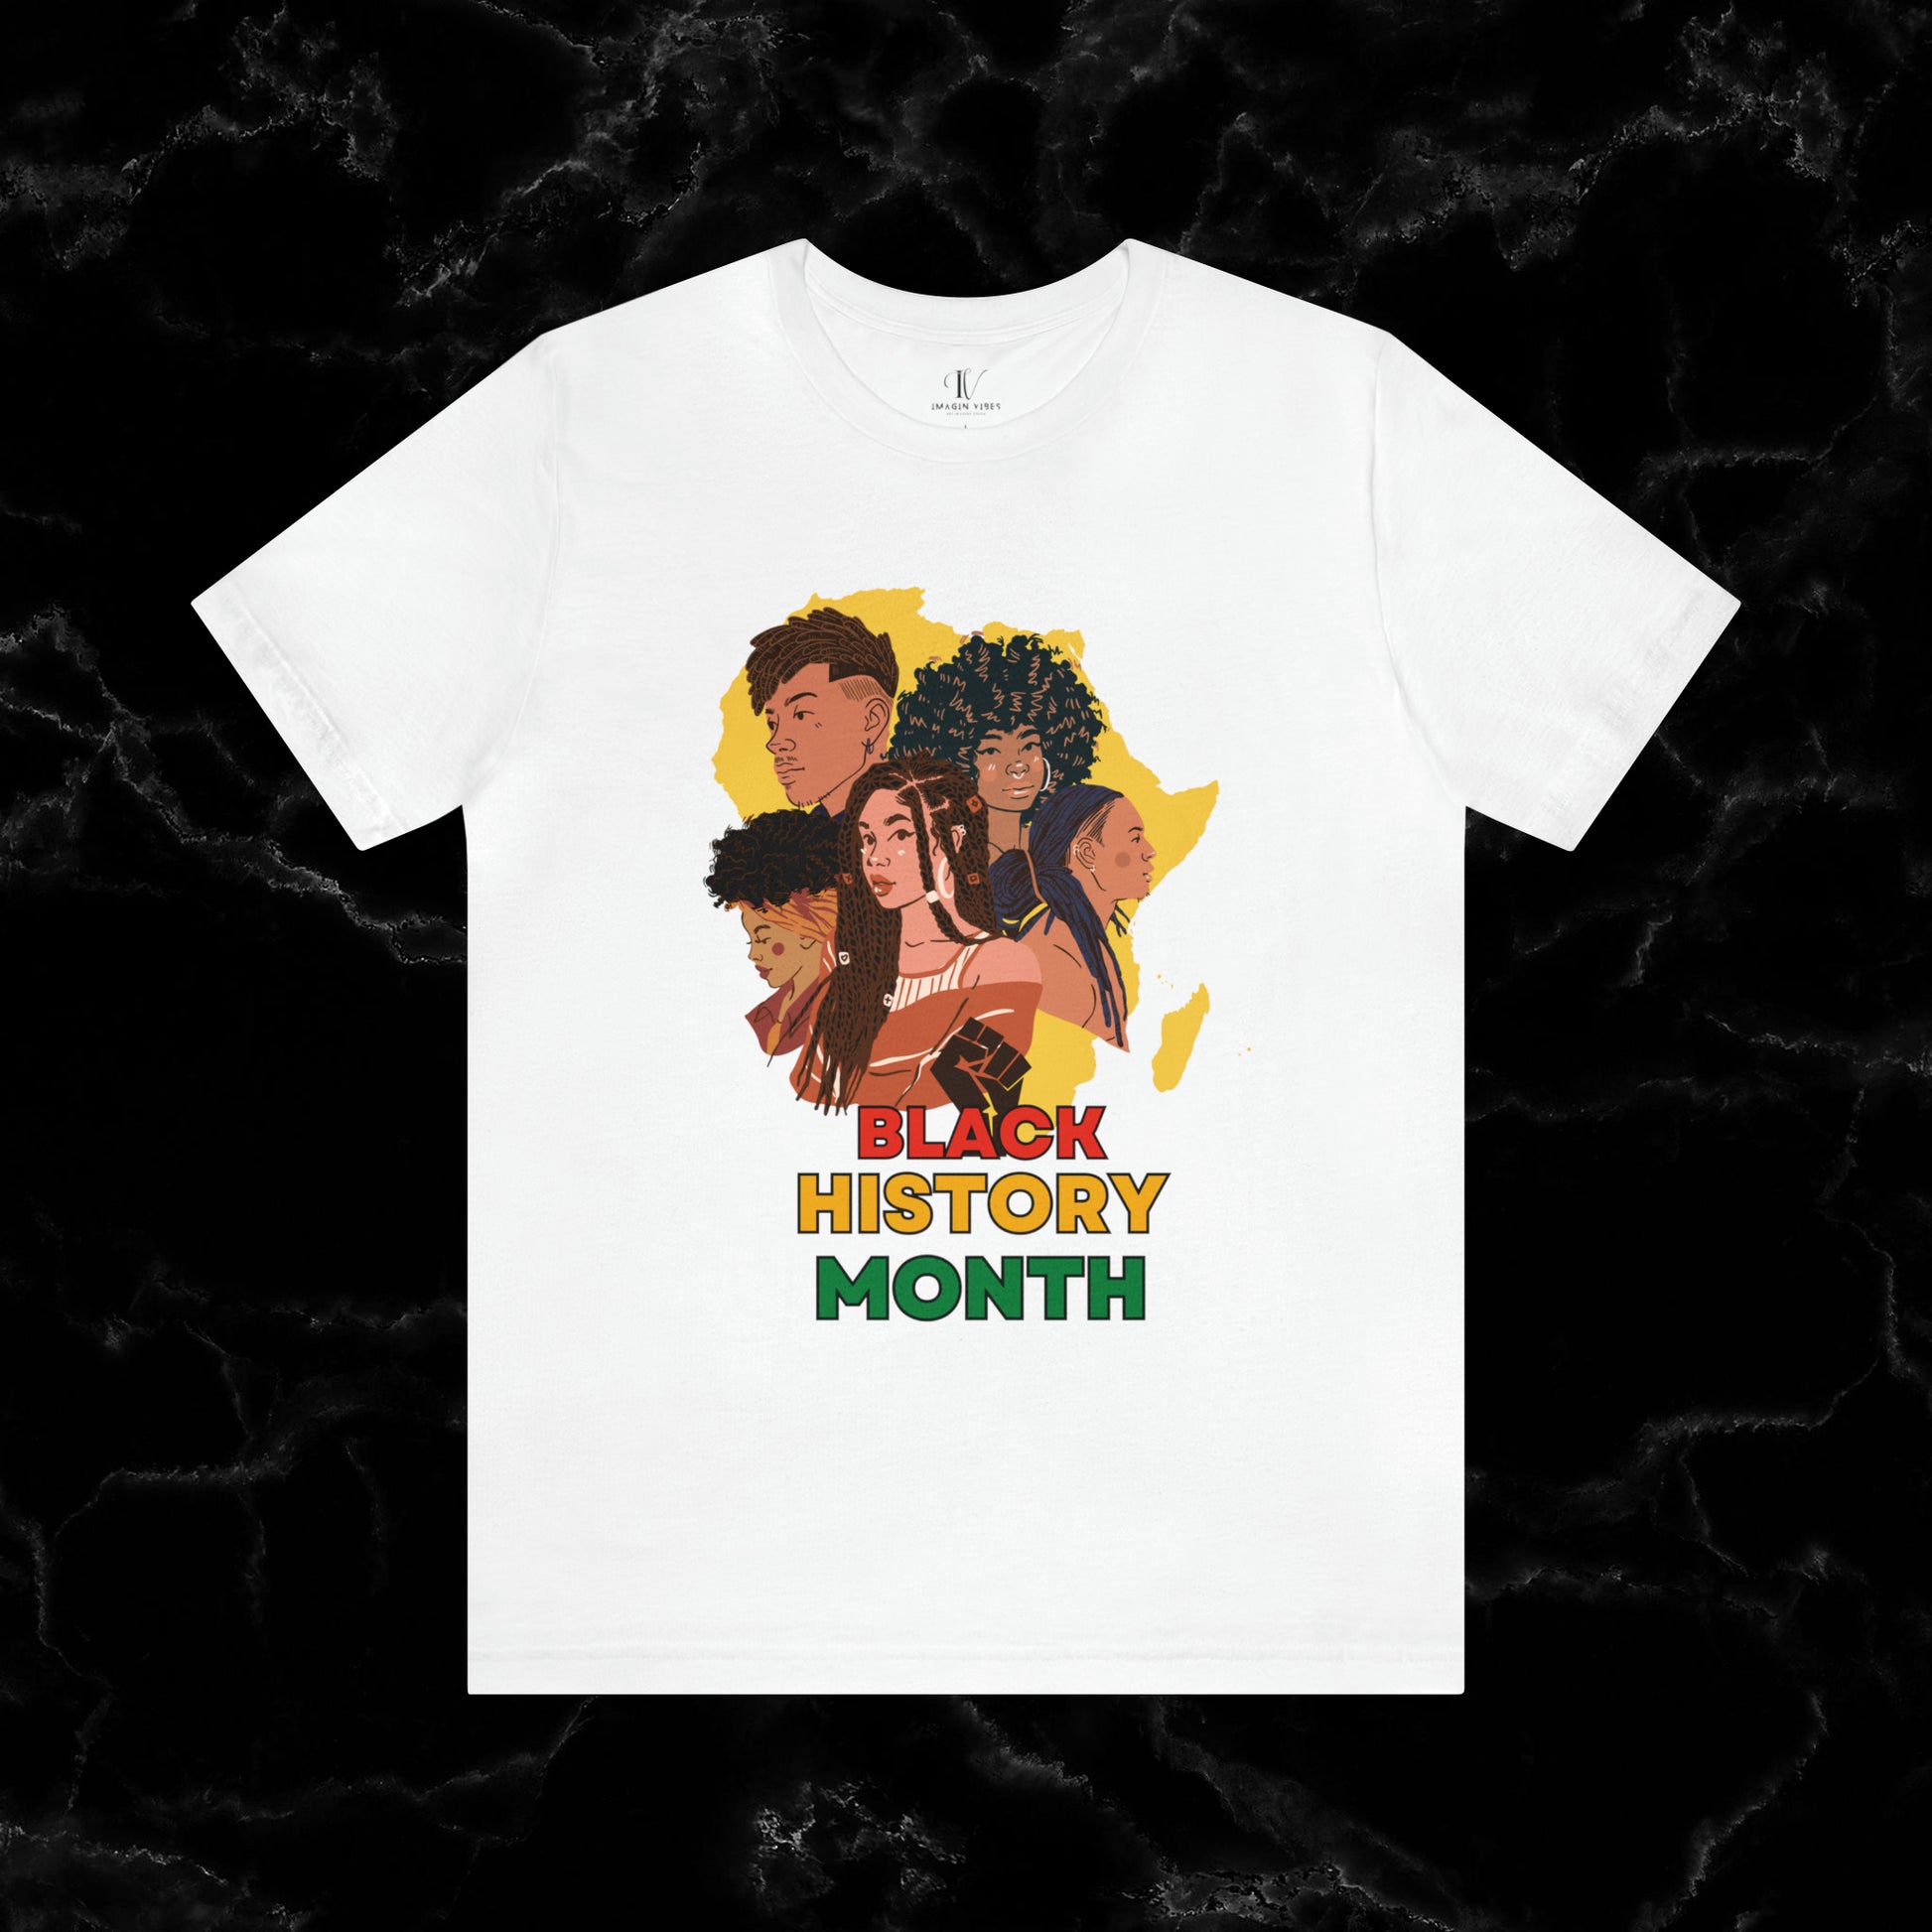 Trendy Black History Month Shirts - Celebrating African American Pride and Heritage T-Shirt White XS 